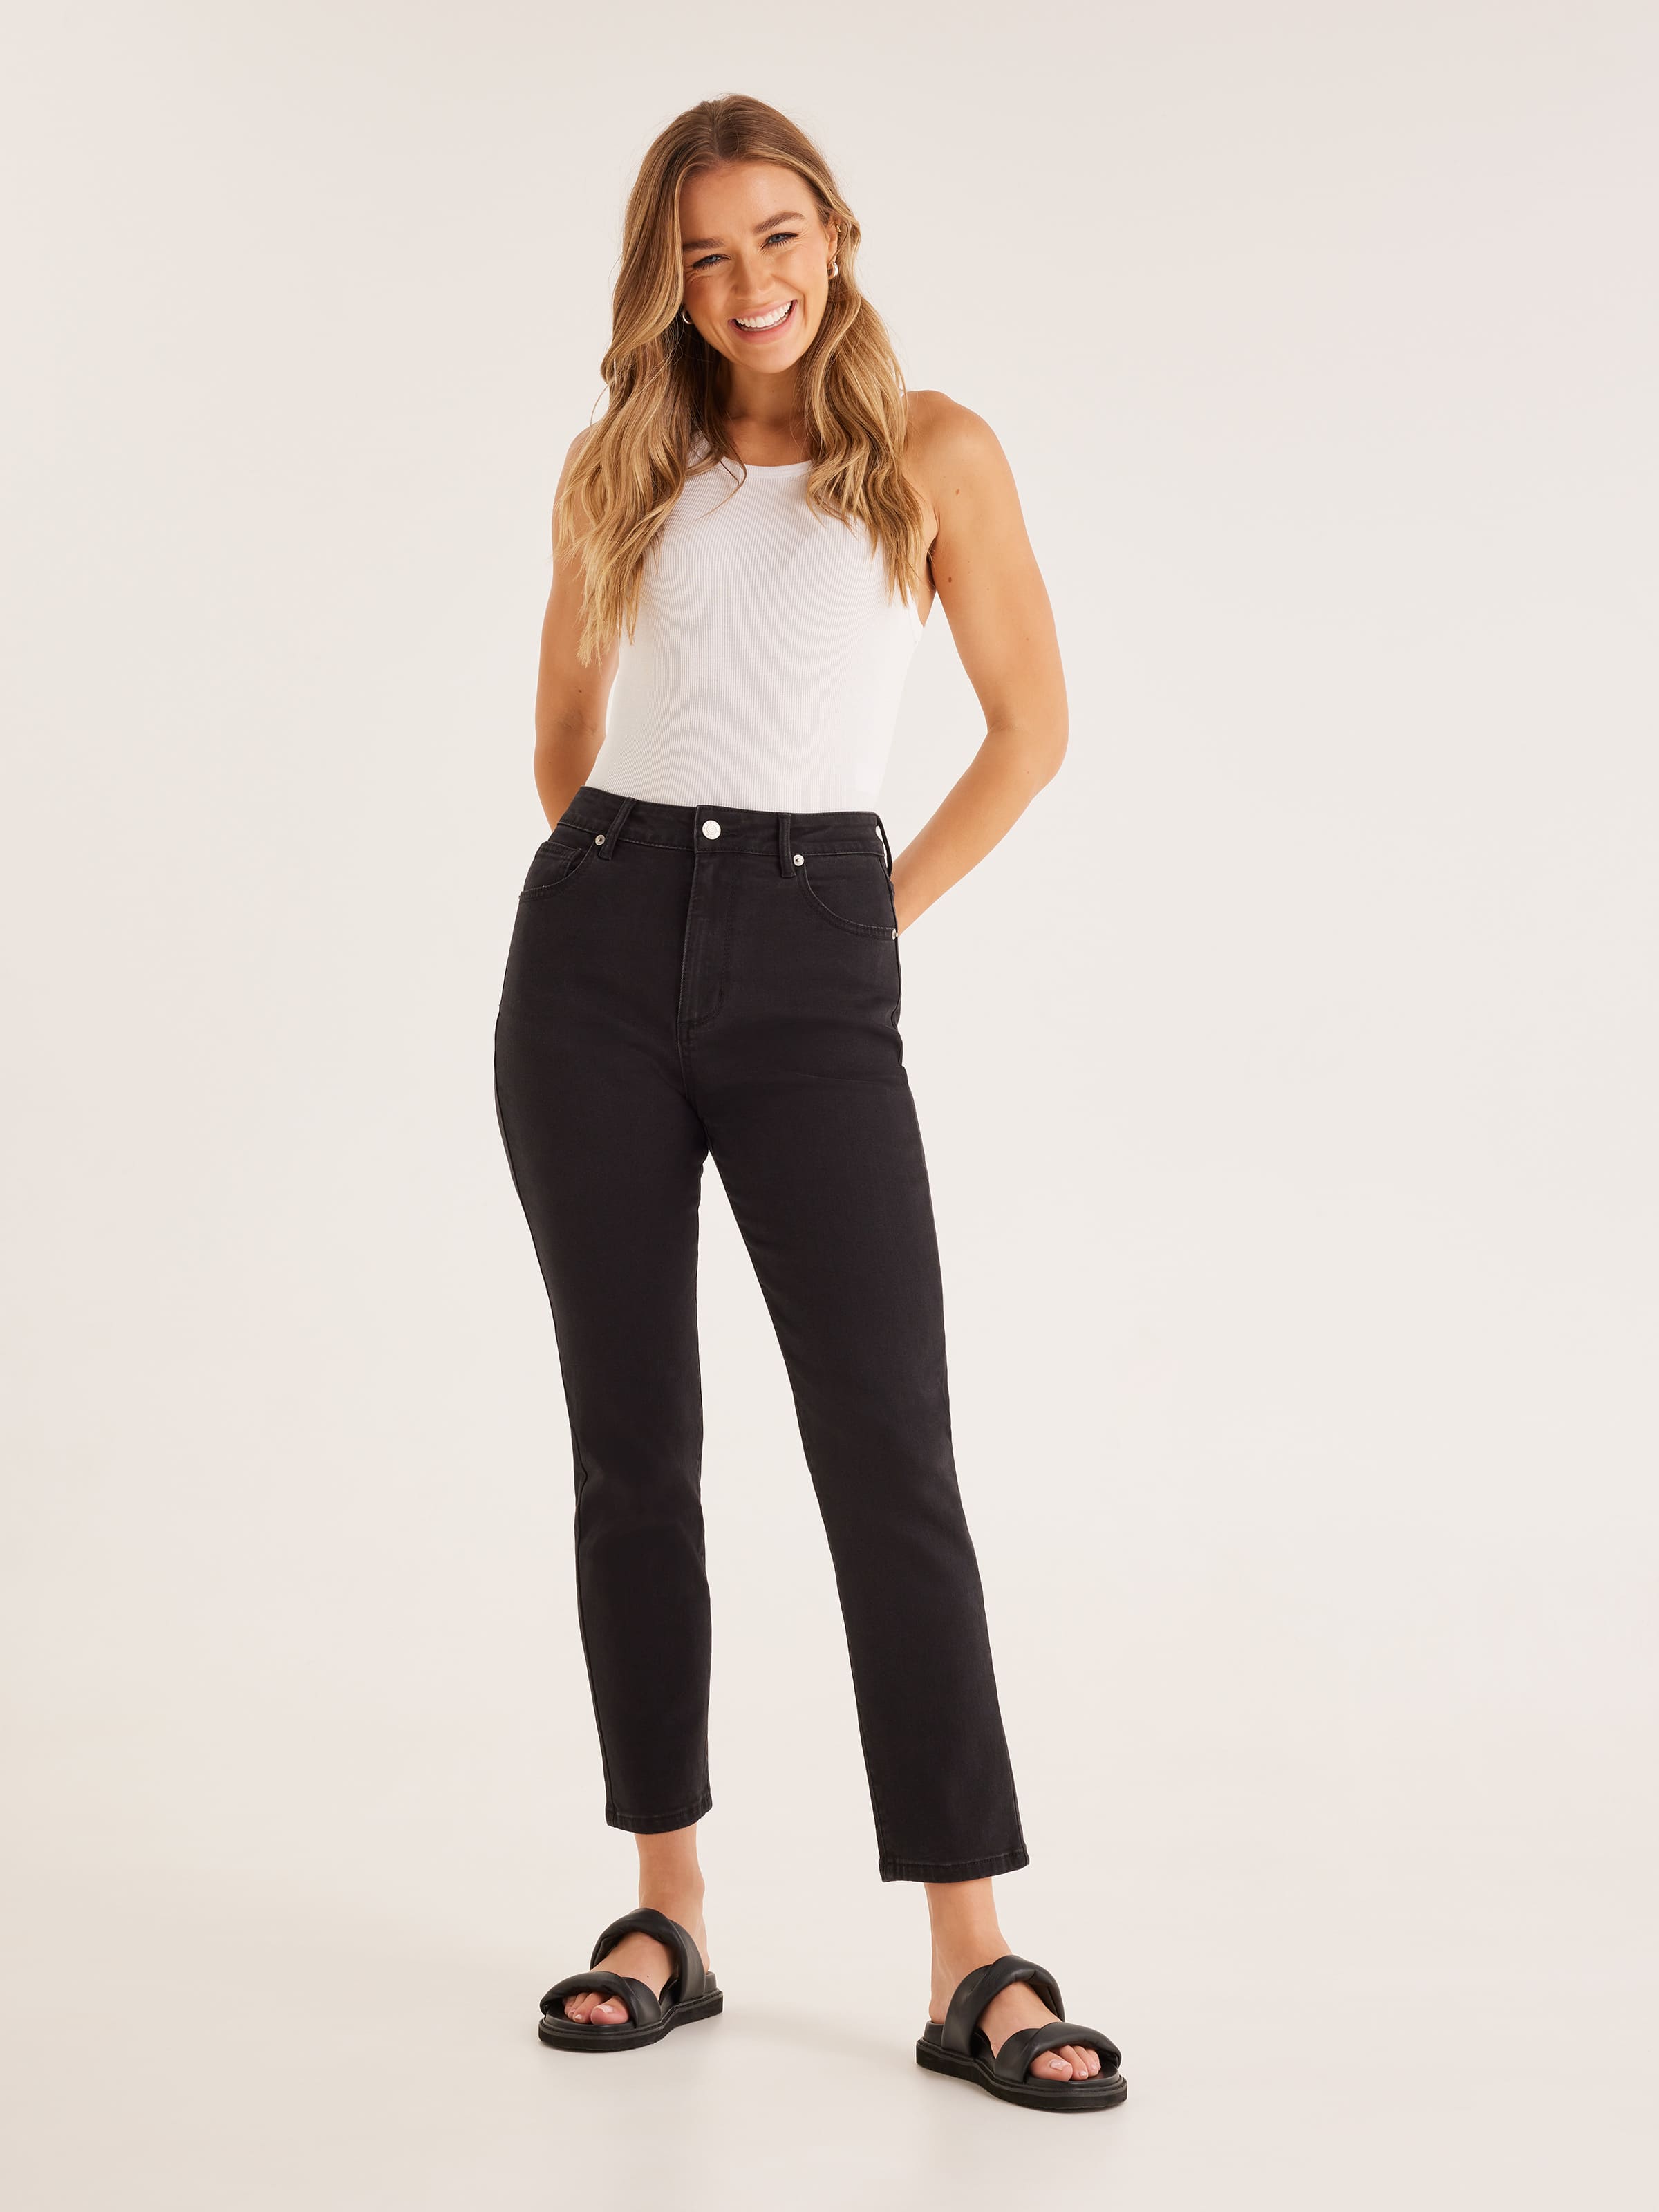 Missguided Drew Black Ripped Mom Jeans  Black ripped mom jeans, Black  distressed jeans outfit, Ripped mom jeans